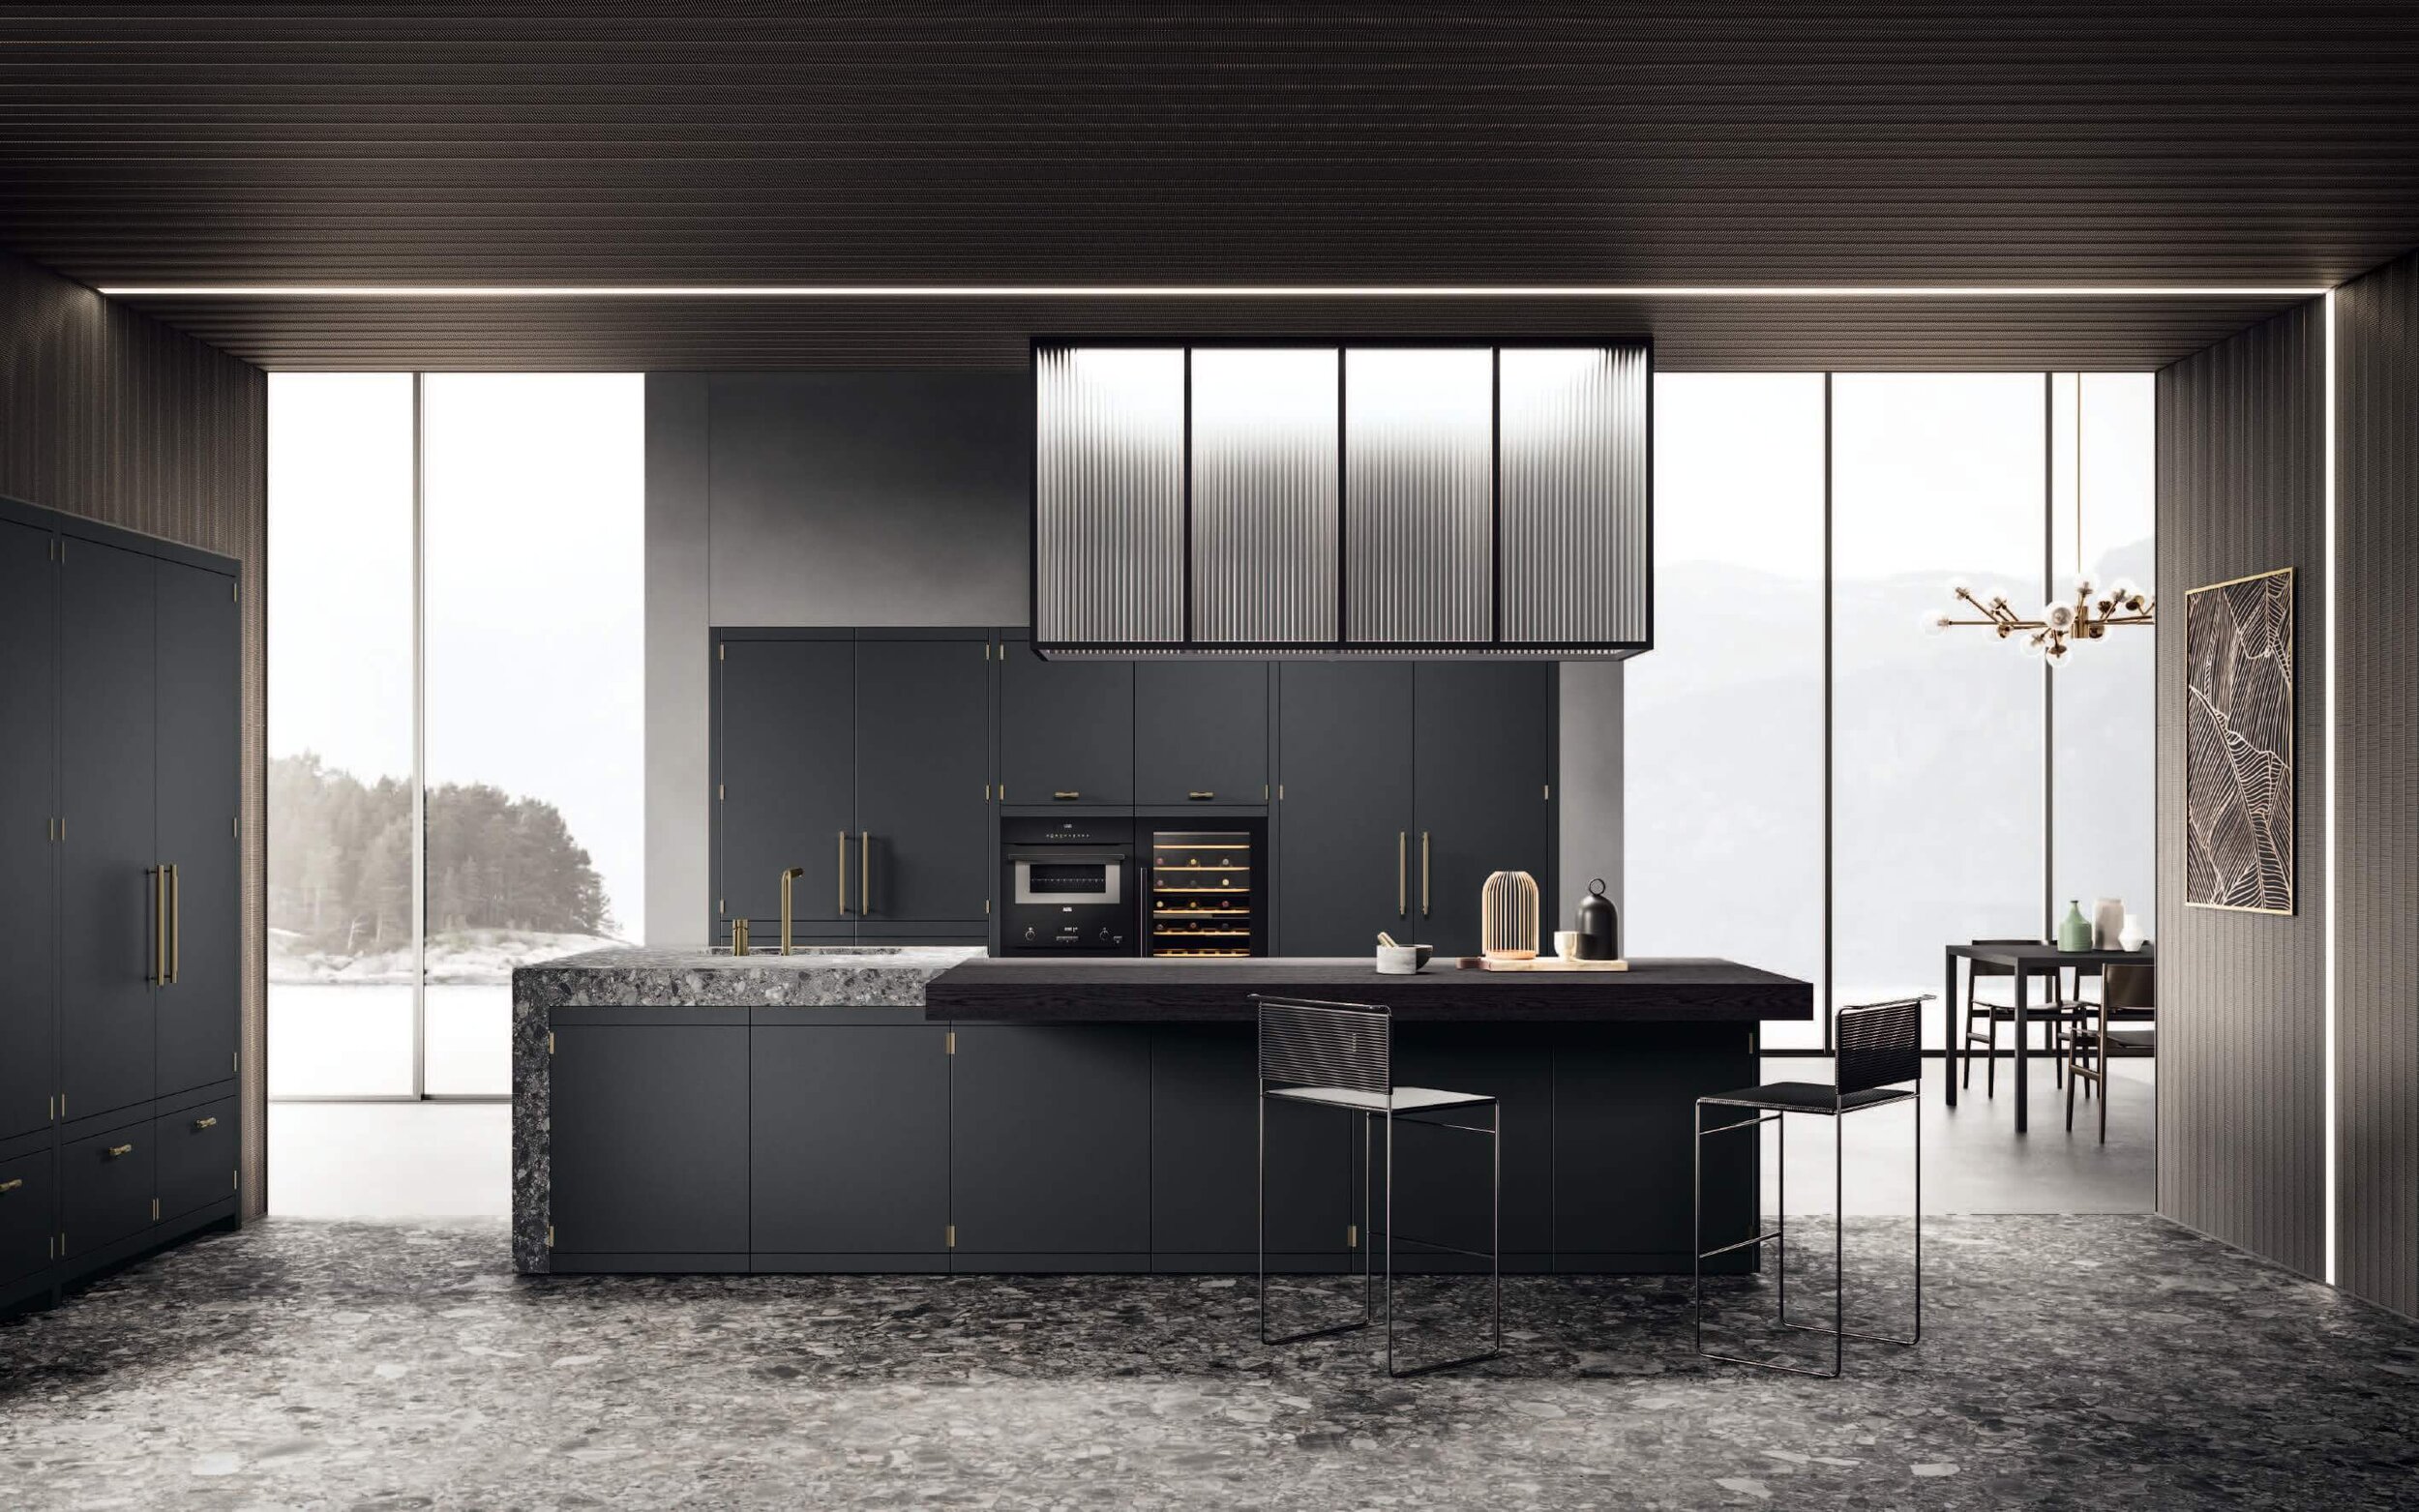   LUXURY GERMAN &amp; ITALIAN KITCHENS    From Design To Installation    Request a brochure   Arrange an appointment   